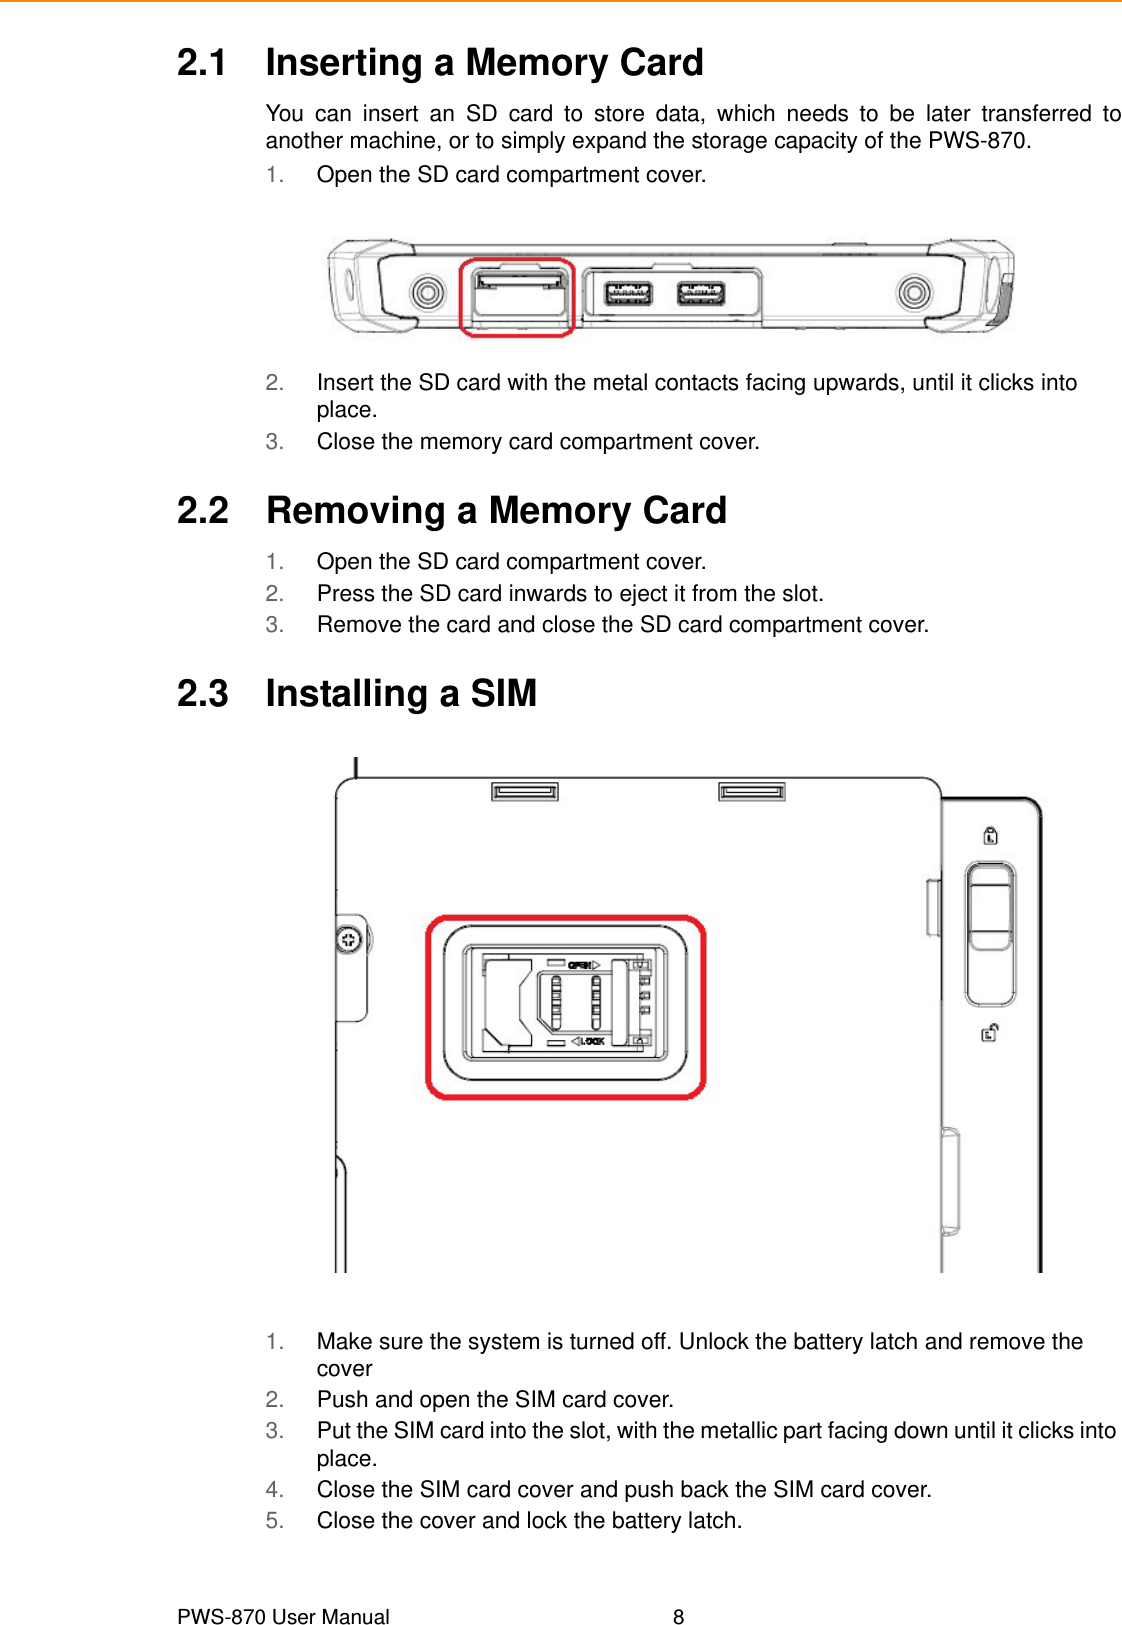 PWS-870 User Manual 82.1 Inserting a Memory CardYou can insert an SD card to store data, which needs to be later transferred toanother machine, or to simply expand the storage capacity of the PWS-870. 1. Open the SD card compartment cover.2. Insert the SD card with the metal contacts facing upwards, until it clicks into place.3. Close the memory card compartment cover.2.2 Removing a Memory Card1. Open the SD card compartment cover.2. Press the SD card inwards to eject it from the slot.3. Remove the card and close the SD card compartment cover.2.3 Installing a SIM1. Make sure the system is turned off. Unlock the battery latch and remove the cover2. Push and open the SIM card cover.3. Put the SIM card into the slot, with the metallic part facing down until it clicks into place.4. Close the SIM card cover and push back the SIM card cover.5. Close the cover and lock the battery latch.